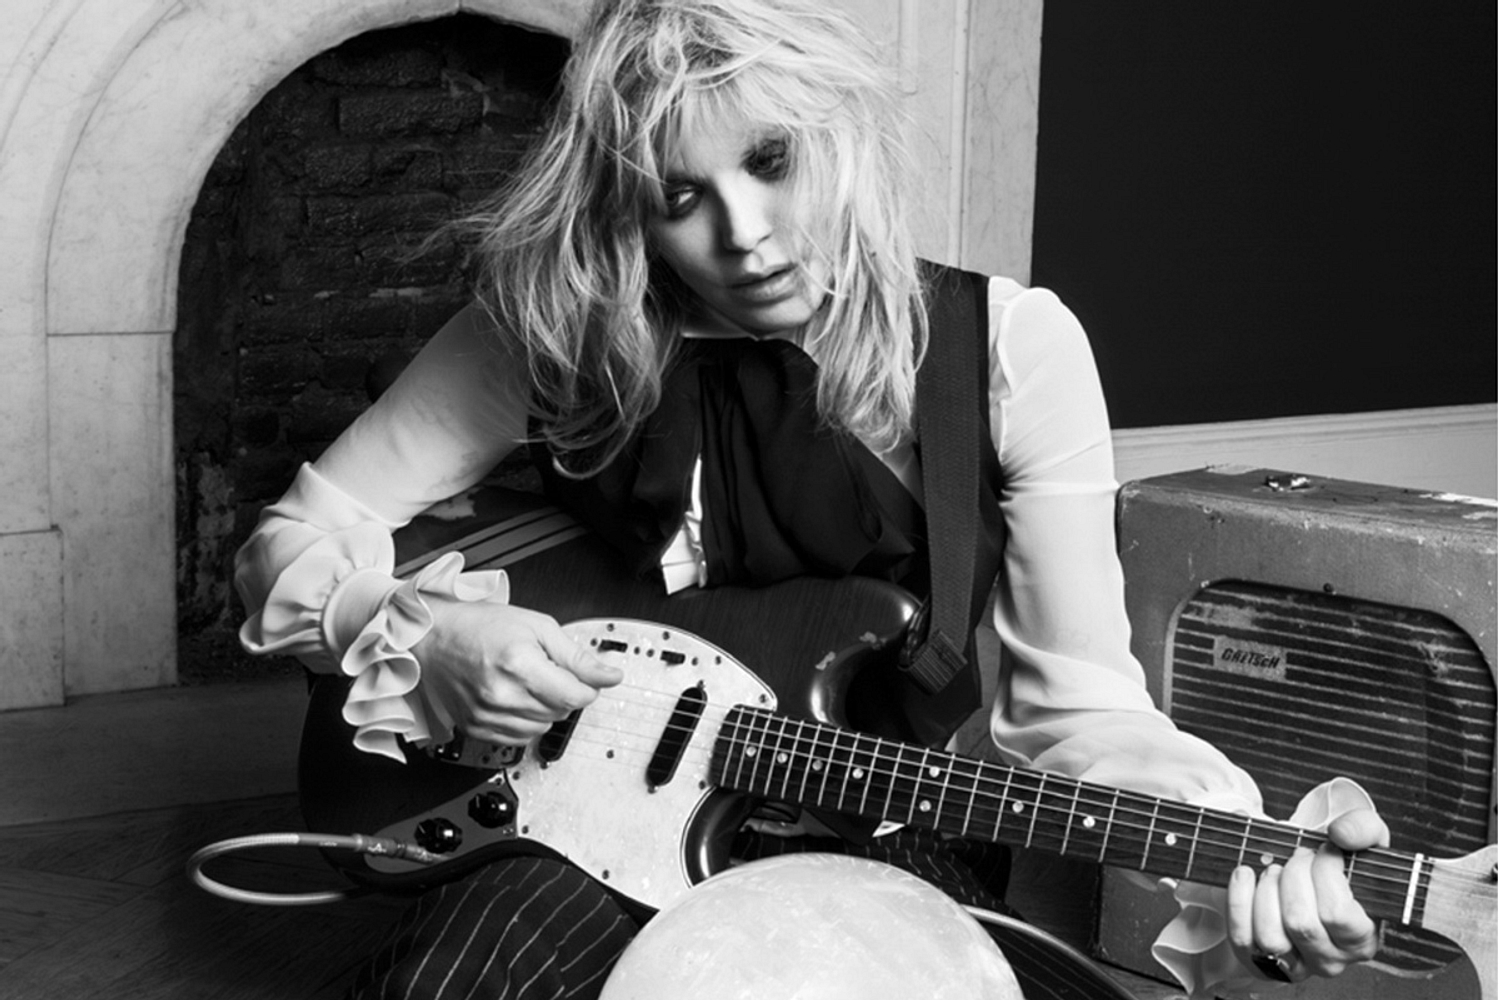 Courtney Love’s Uber is being attacked with “metal bats” in Paris strike